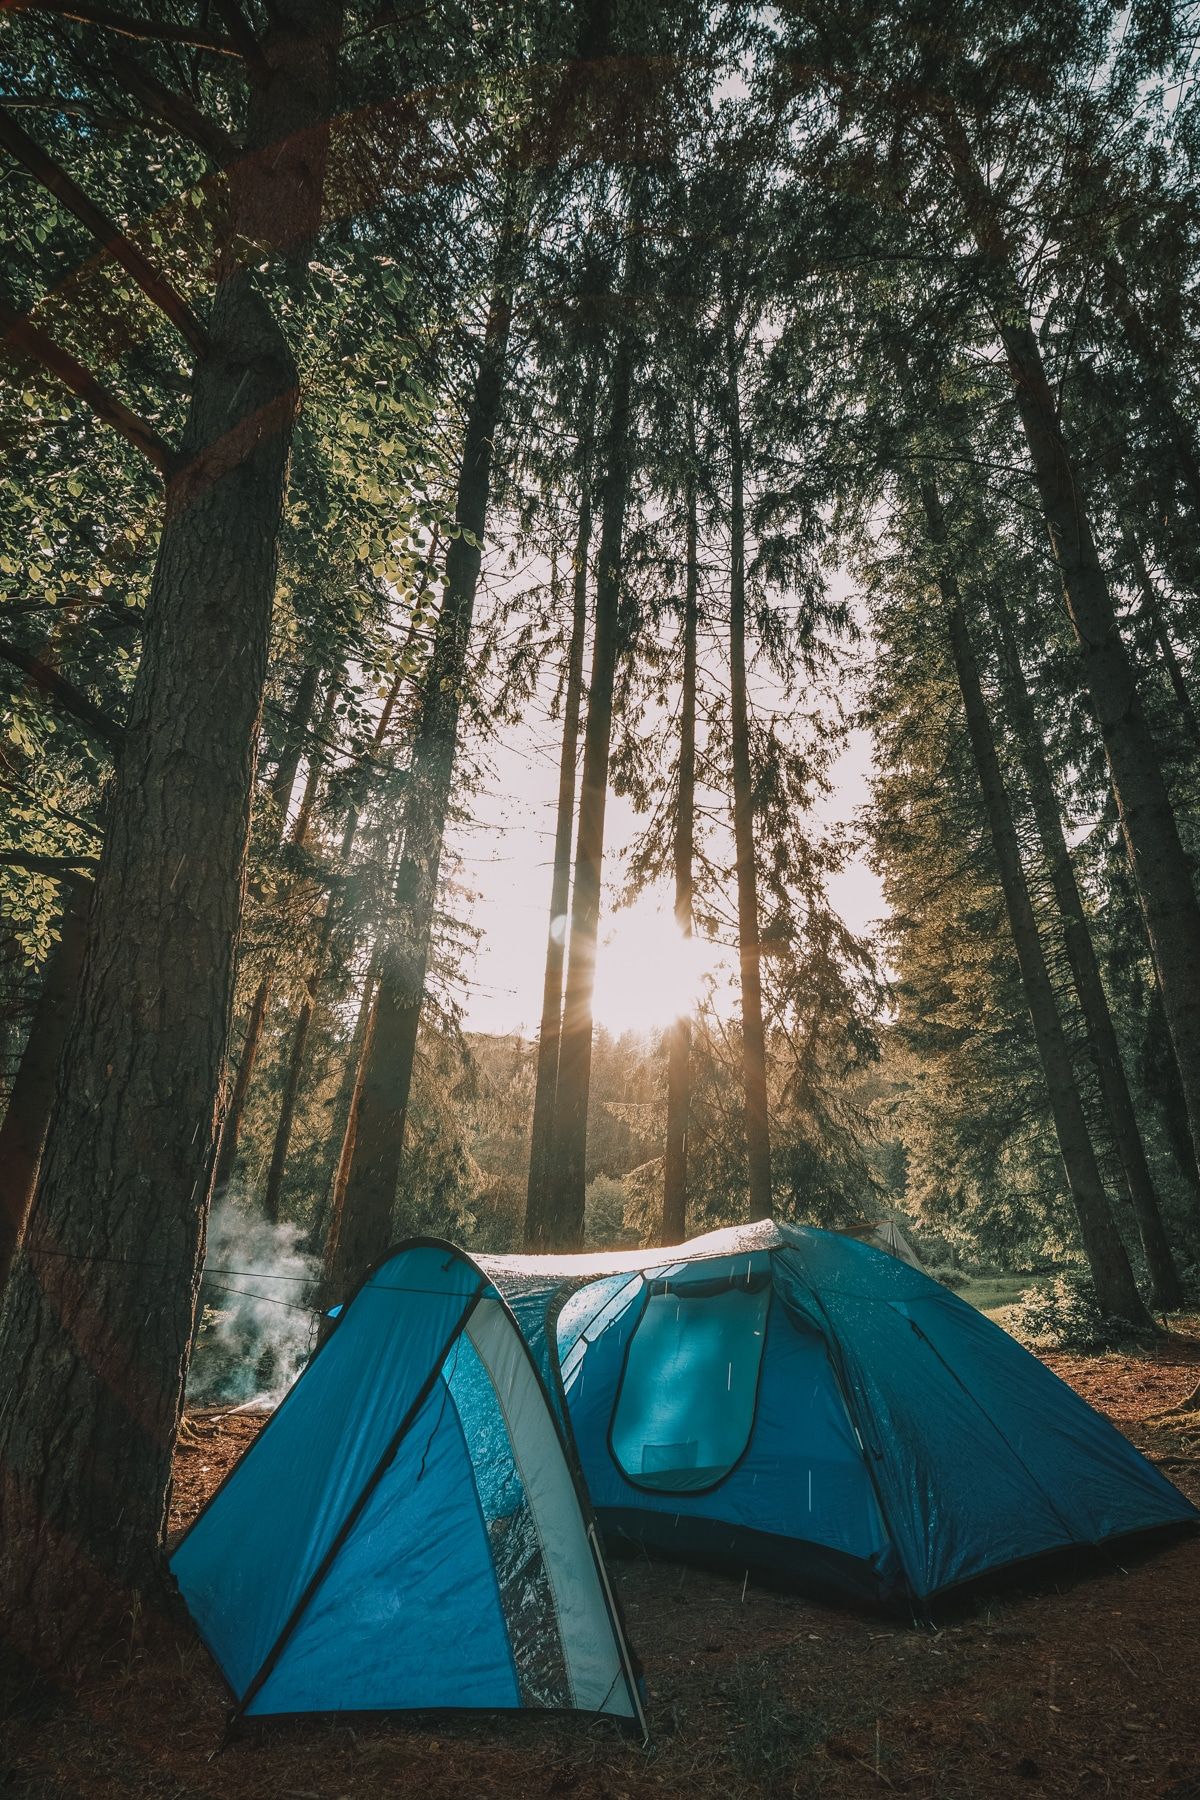 A blue family tent with a vestibule amongst tall evergreen trees, with sunlight shining through the branches.